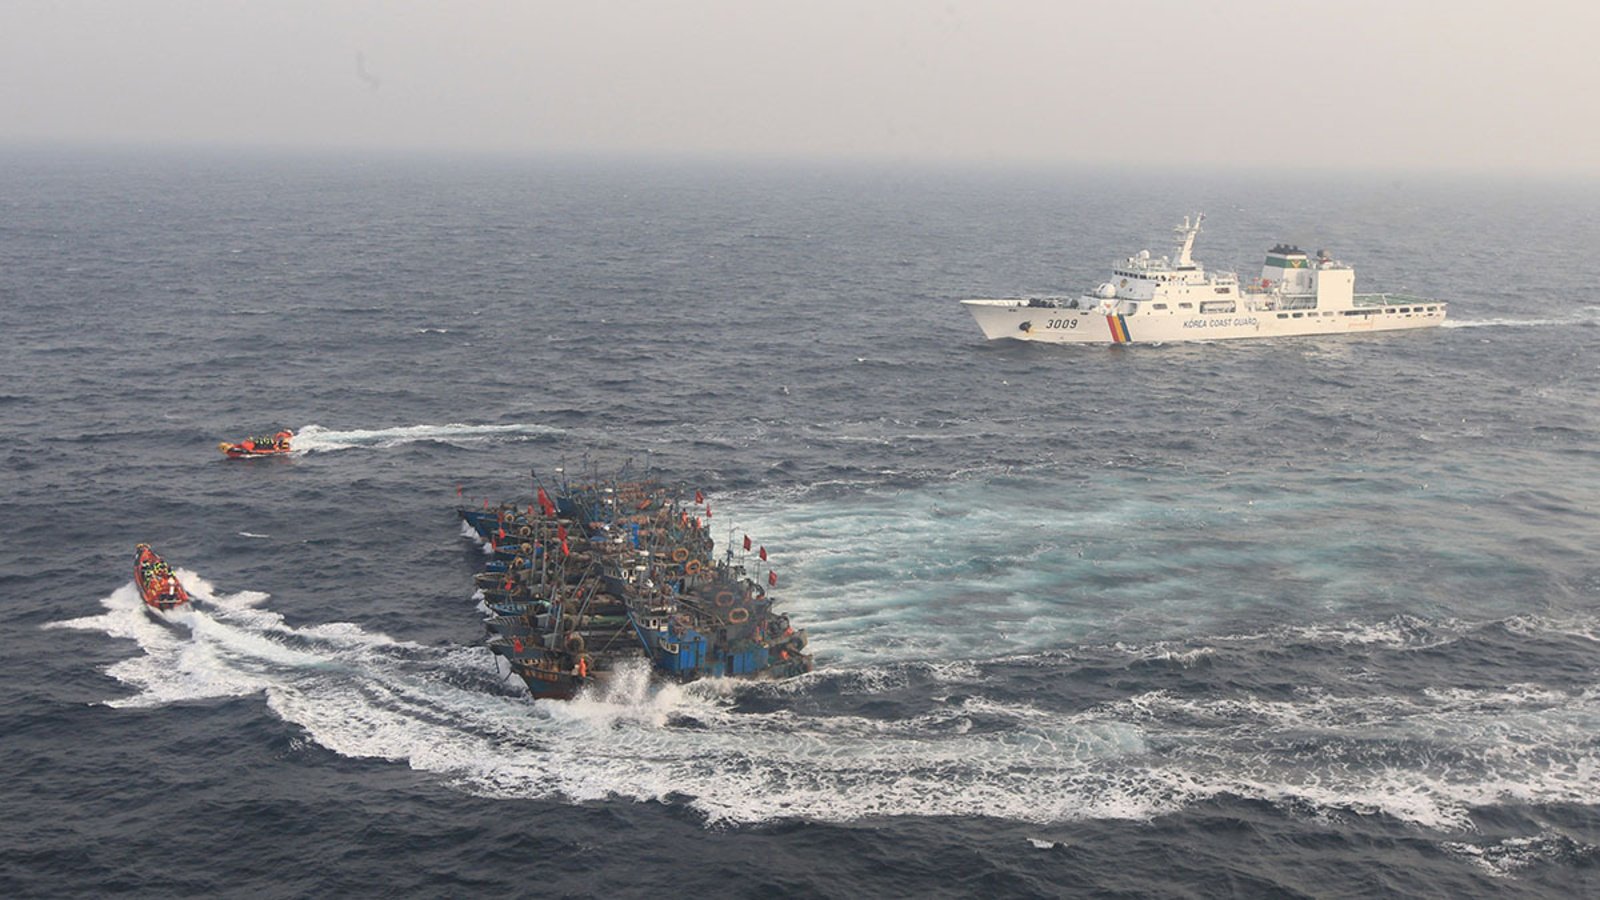 Illegal Fishing Is a Global Threat. Here's How to Combat It.